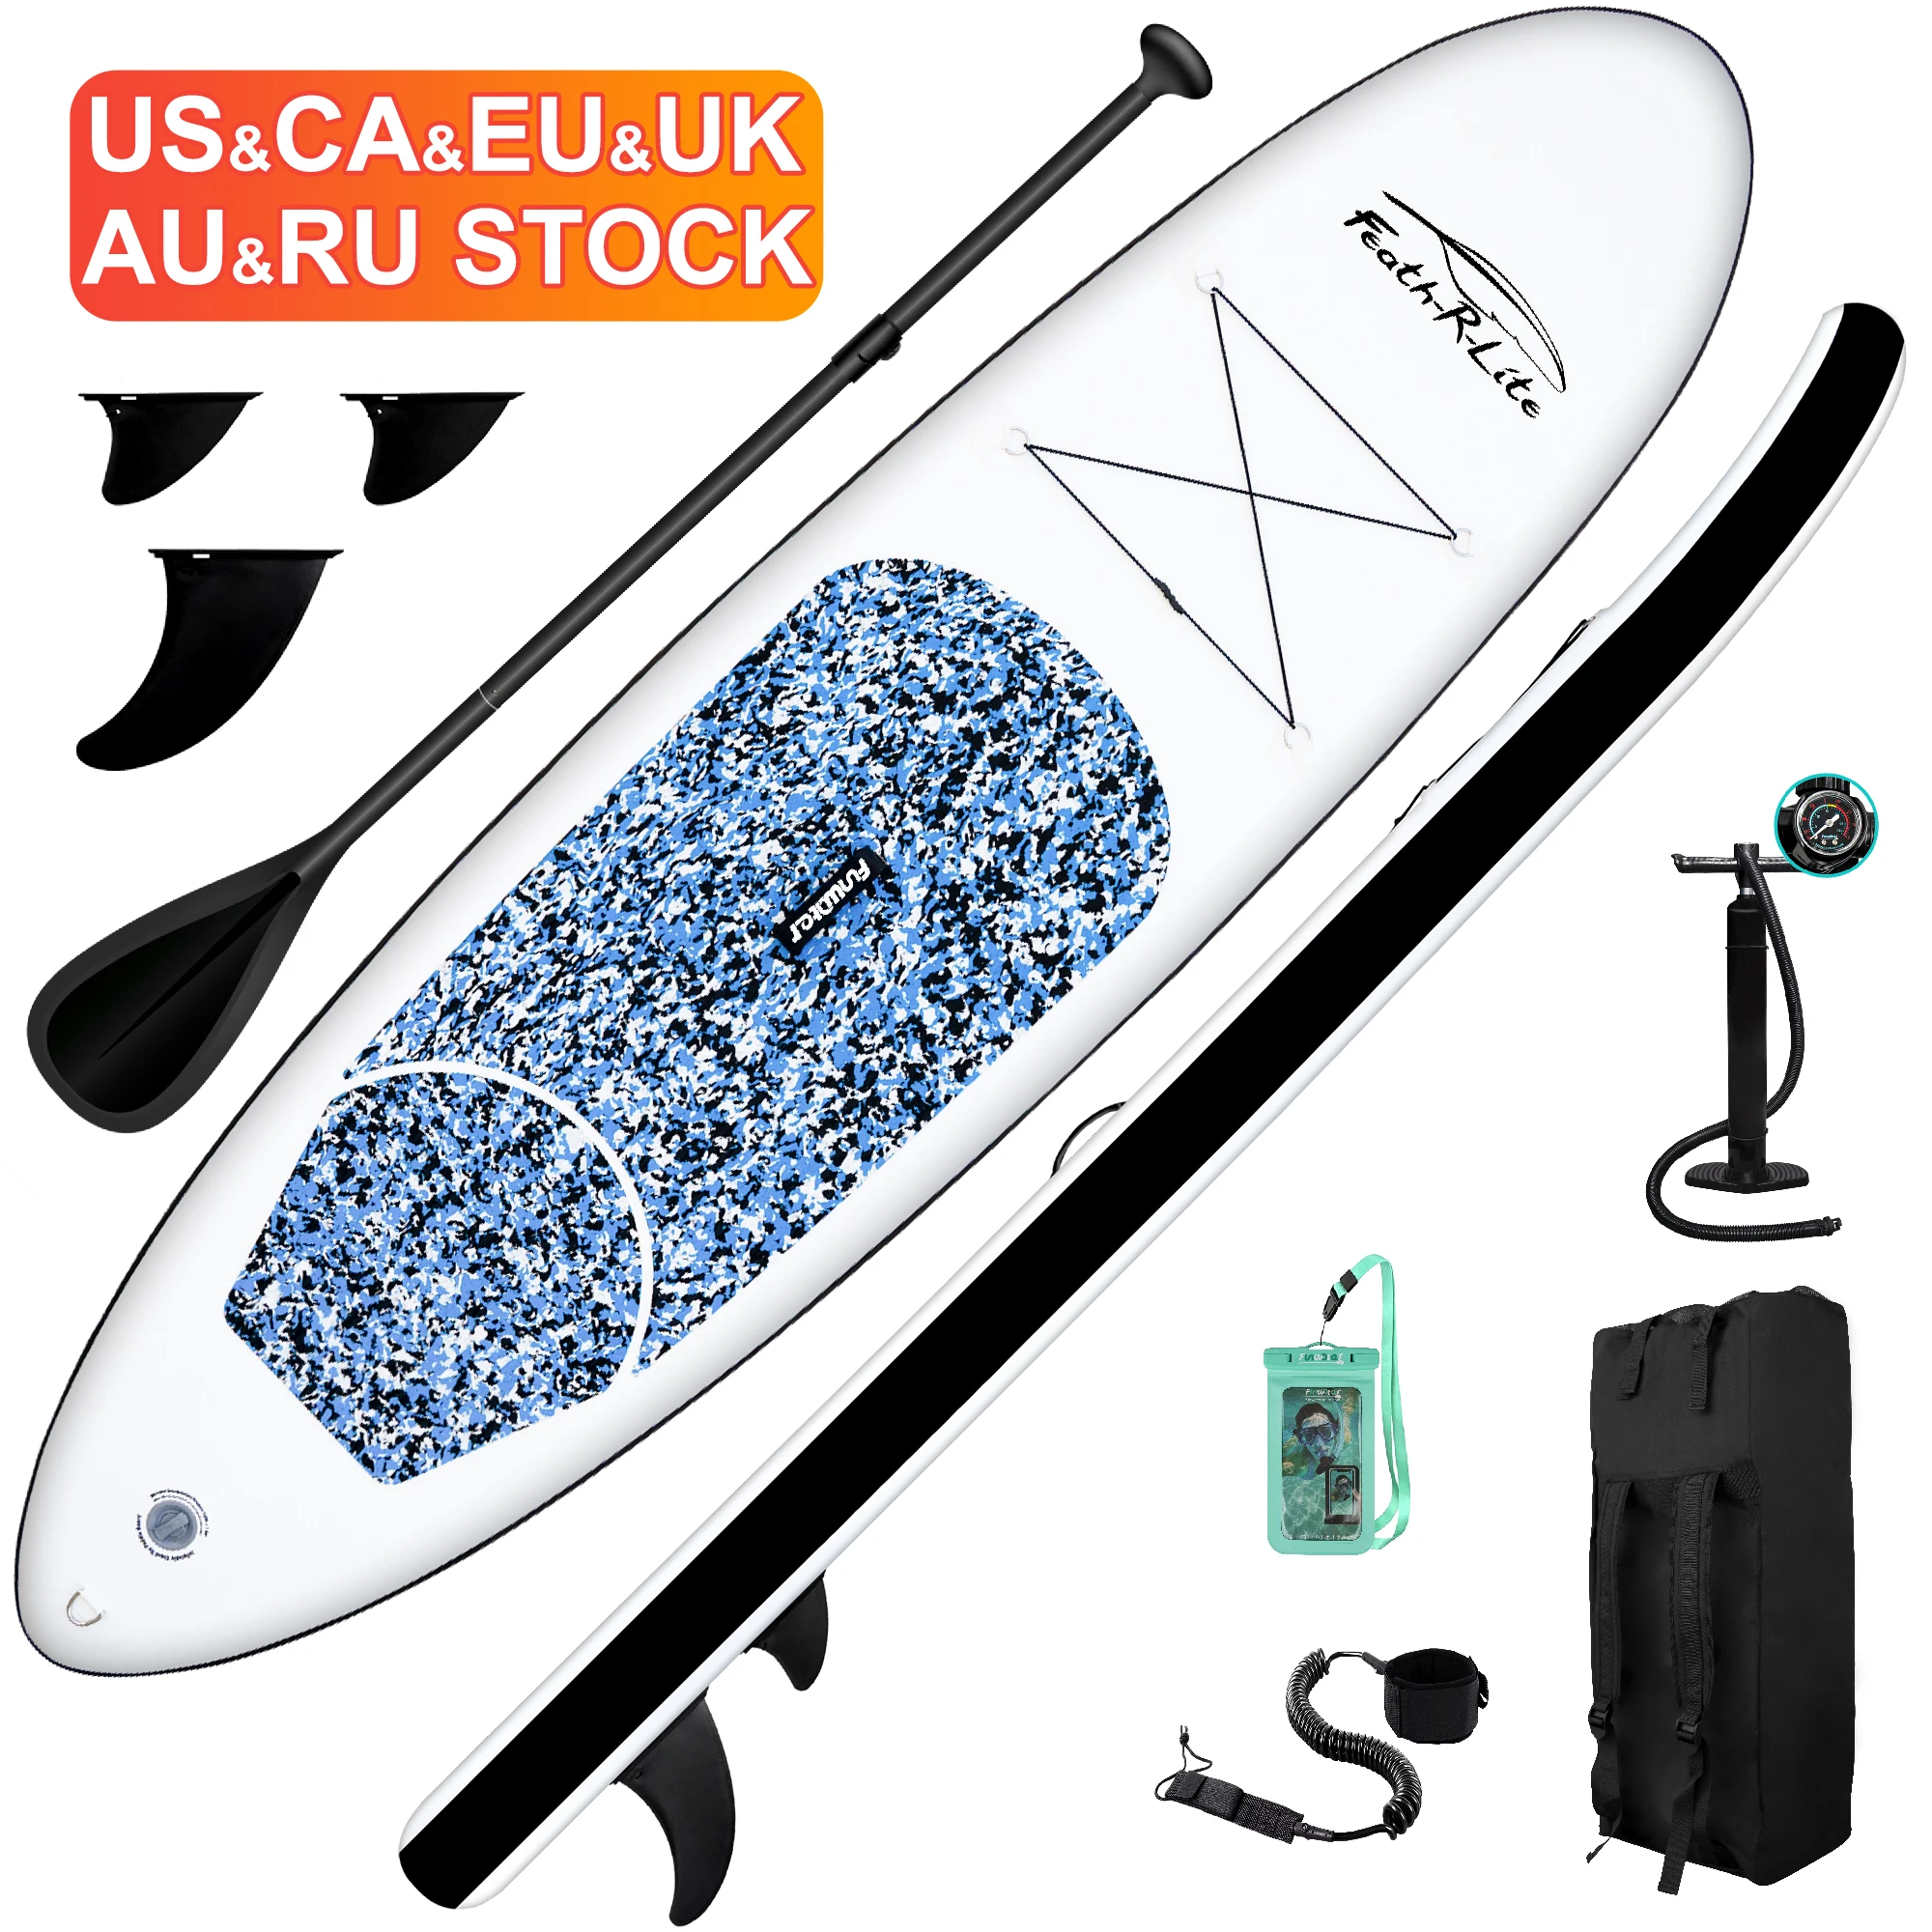 

FUNWATER Dropshipping OEM Cheap price blue surfingboard wholesale surfboards inflatable standup sup CE paddle board surf board